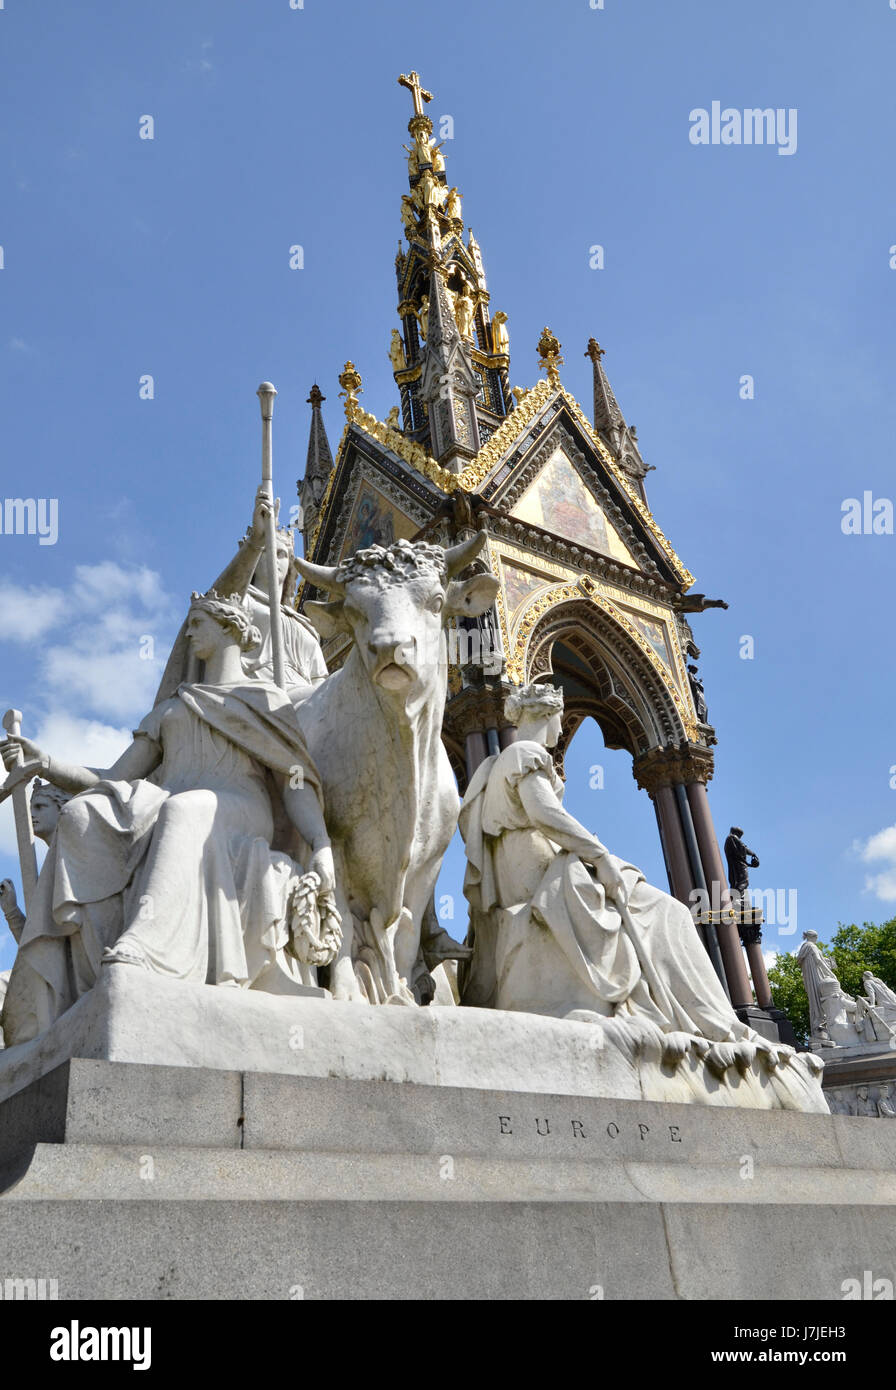 The Europe Group allegorical sculptures at the Albert Memorial in Kensington Gardens, London designed by Patrick MacDowell Stock Photo